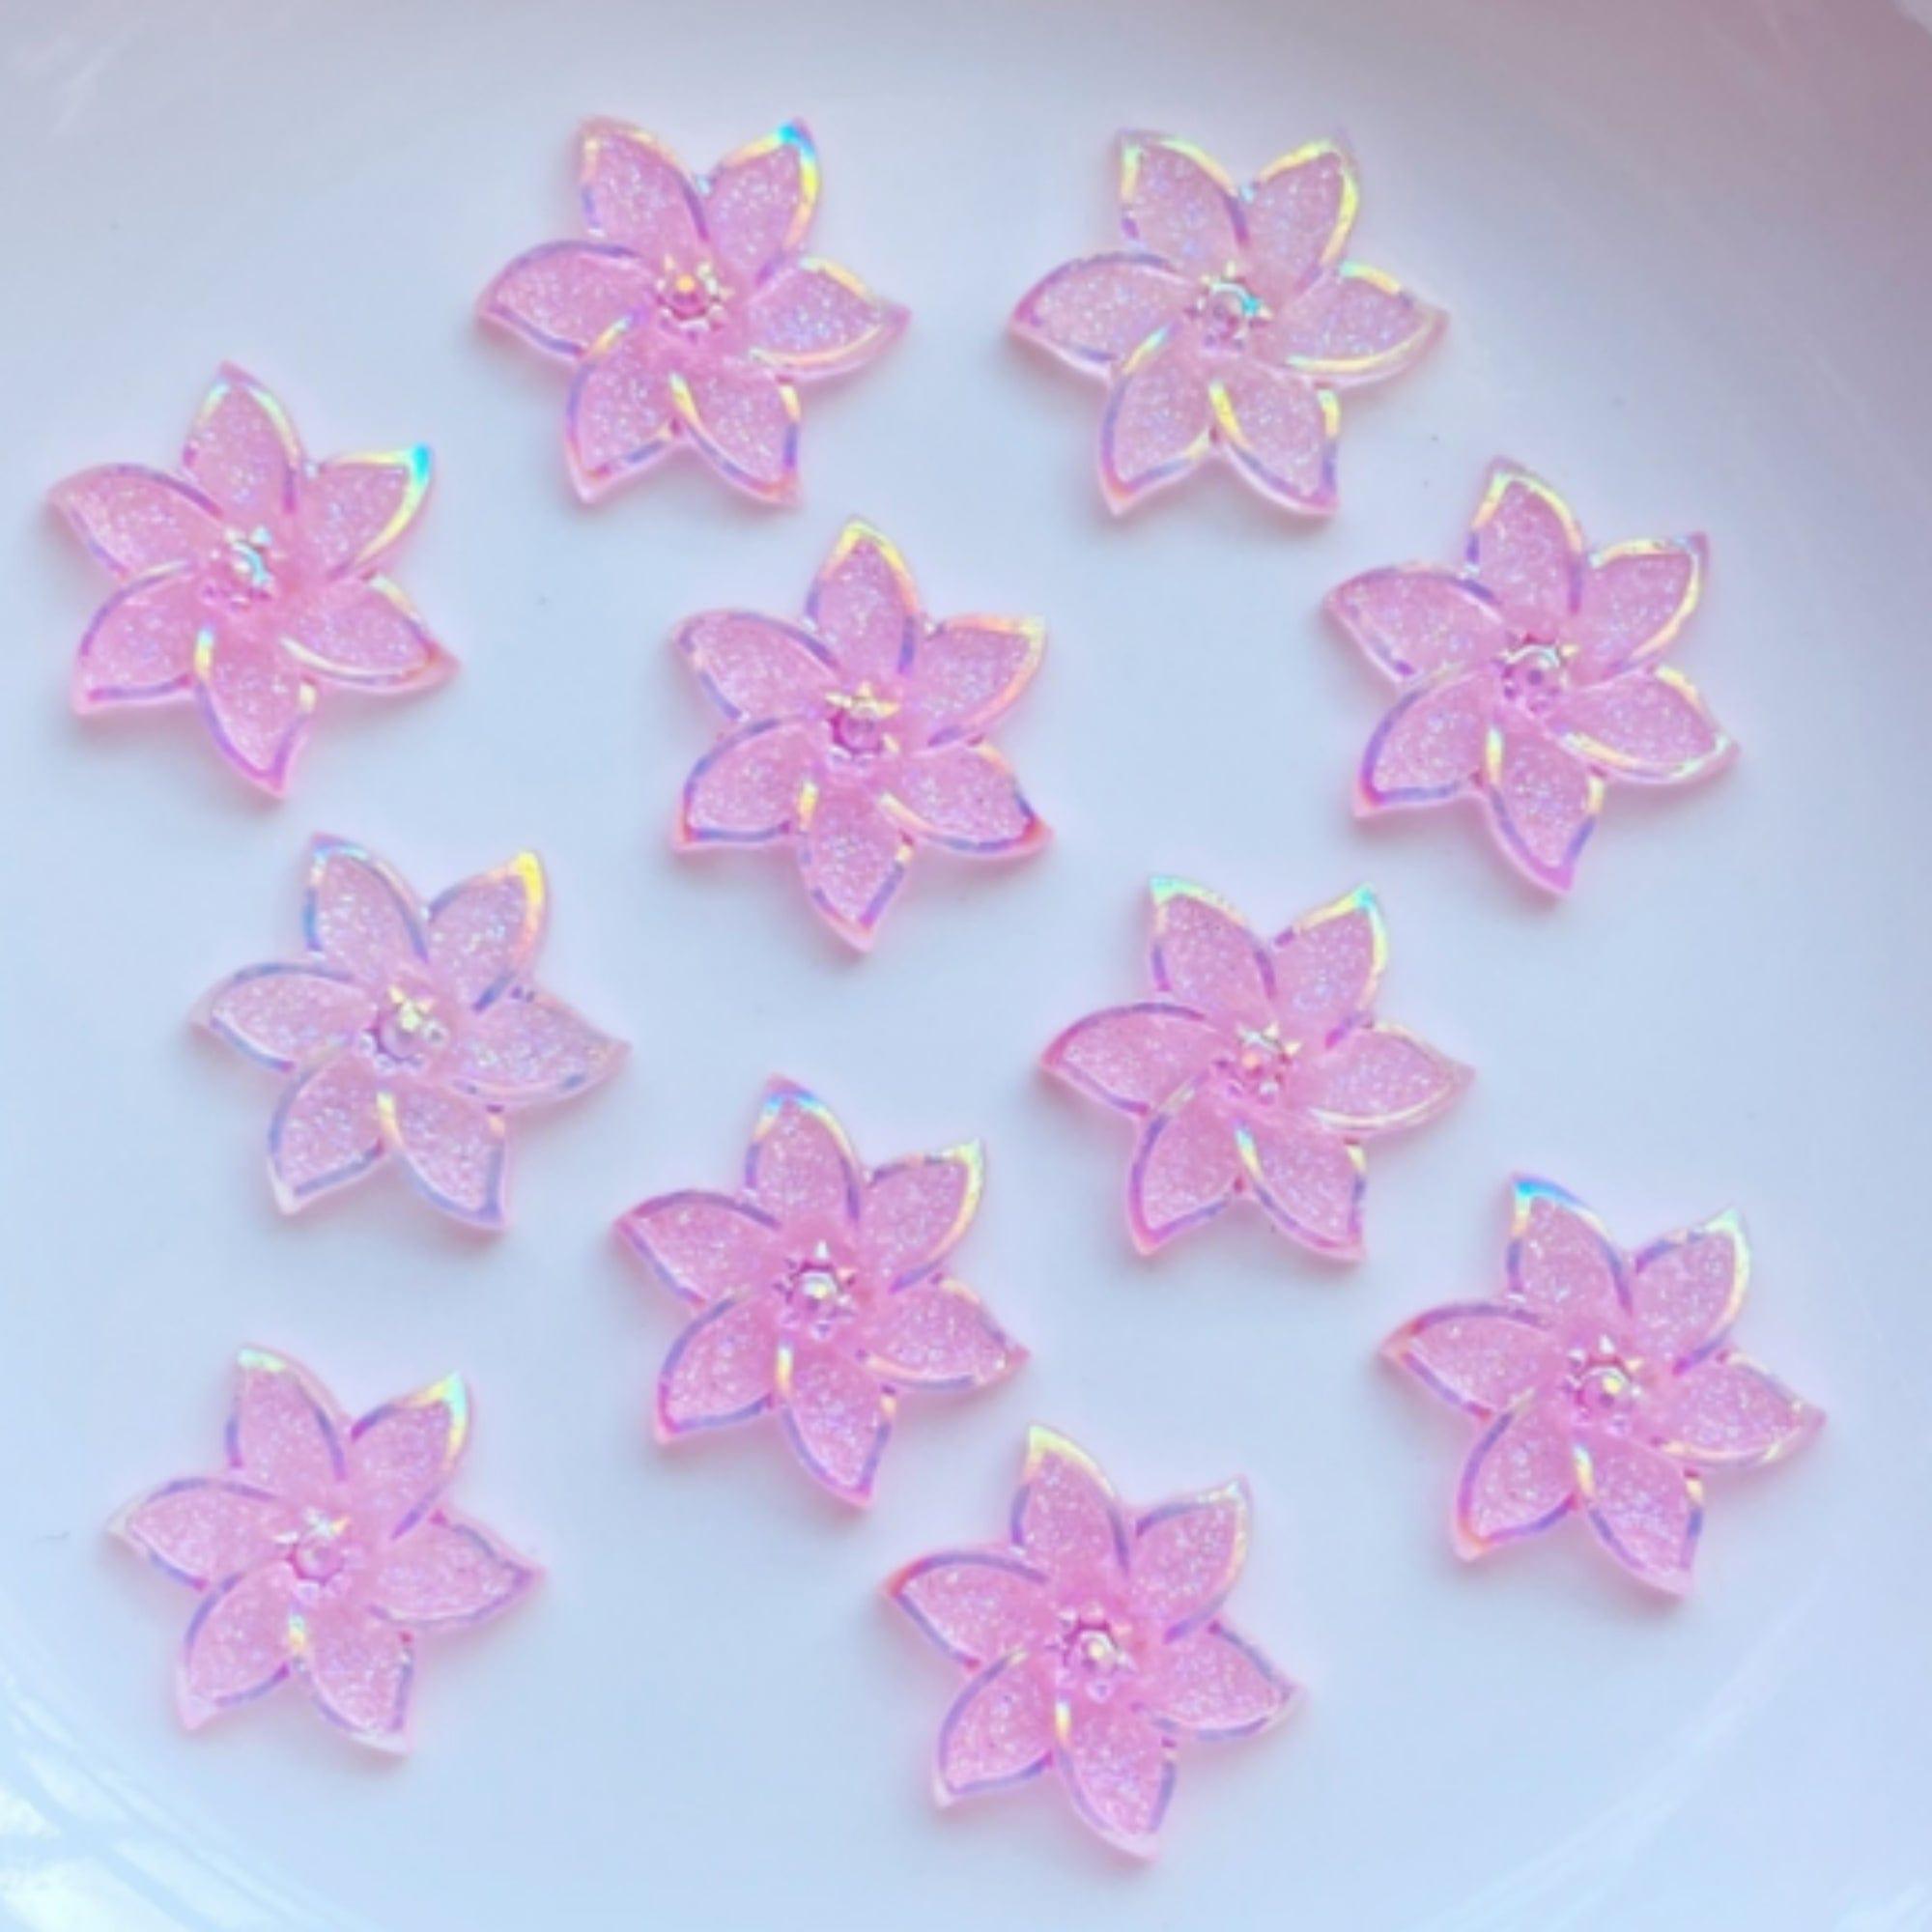 Iridescent Baby Pink Mini Flower Resin 1/2 inch Flatback Embellishments by SSC Designs - 10 pieces